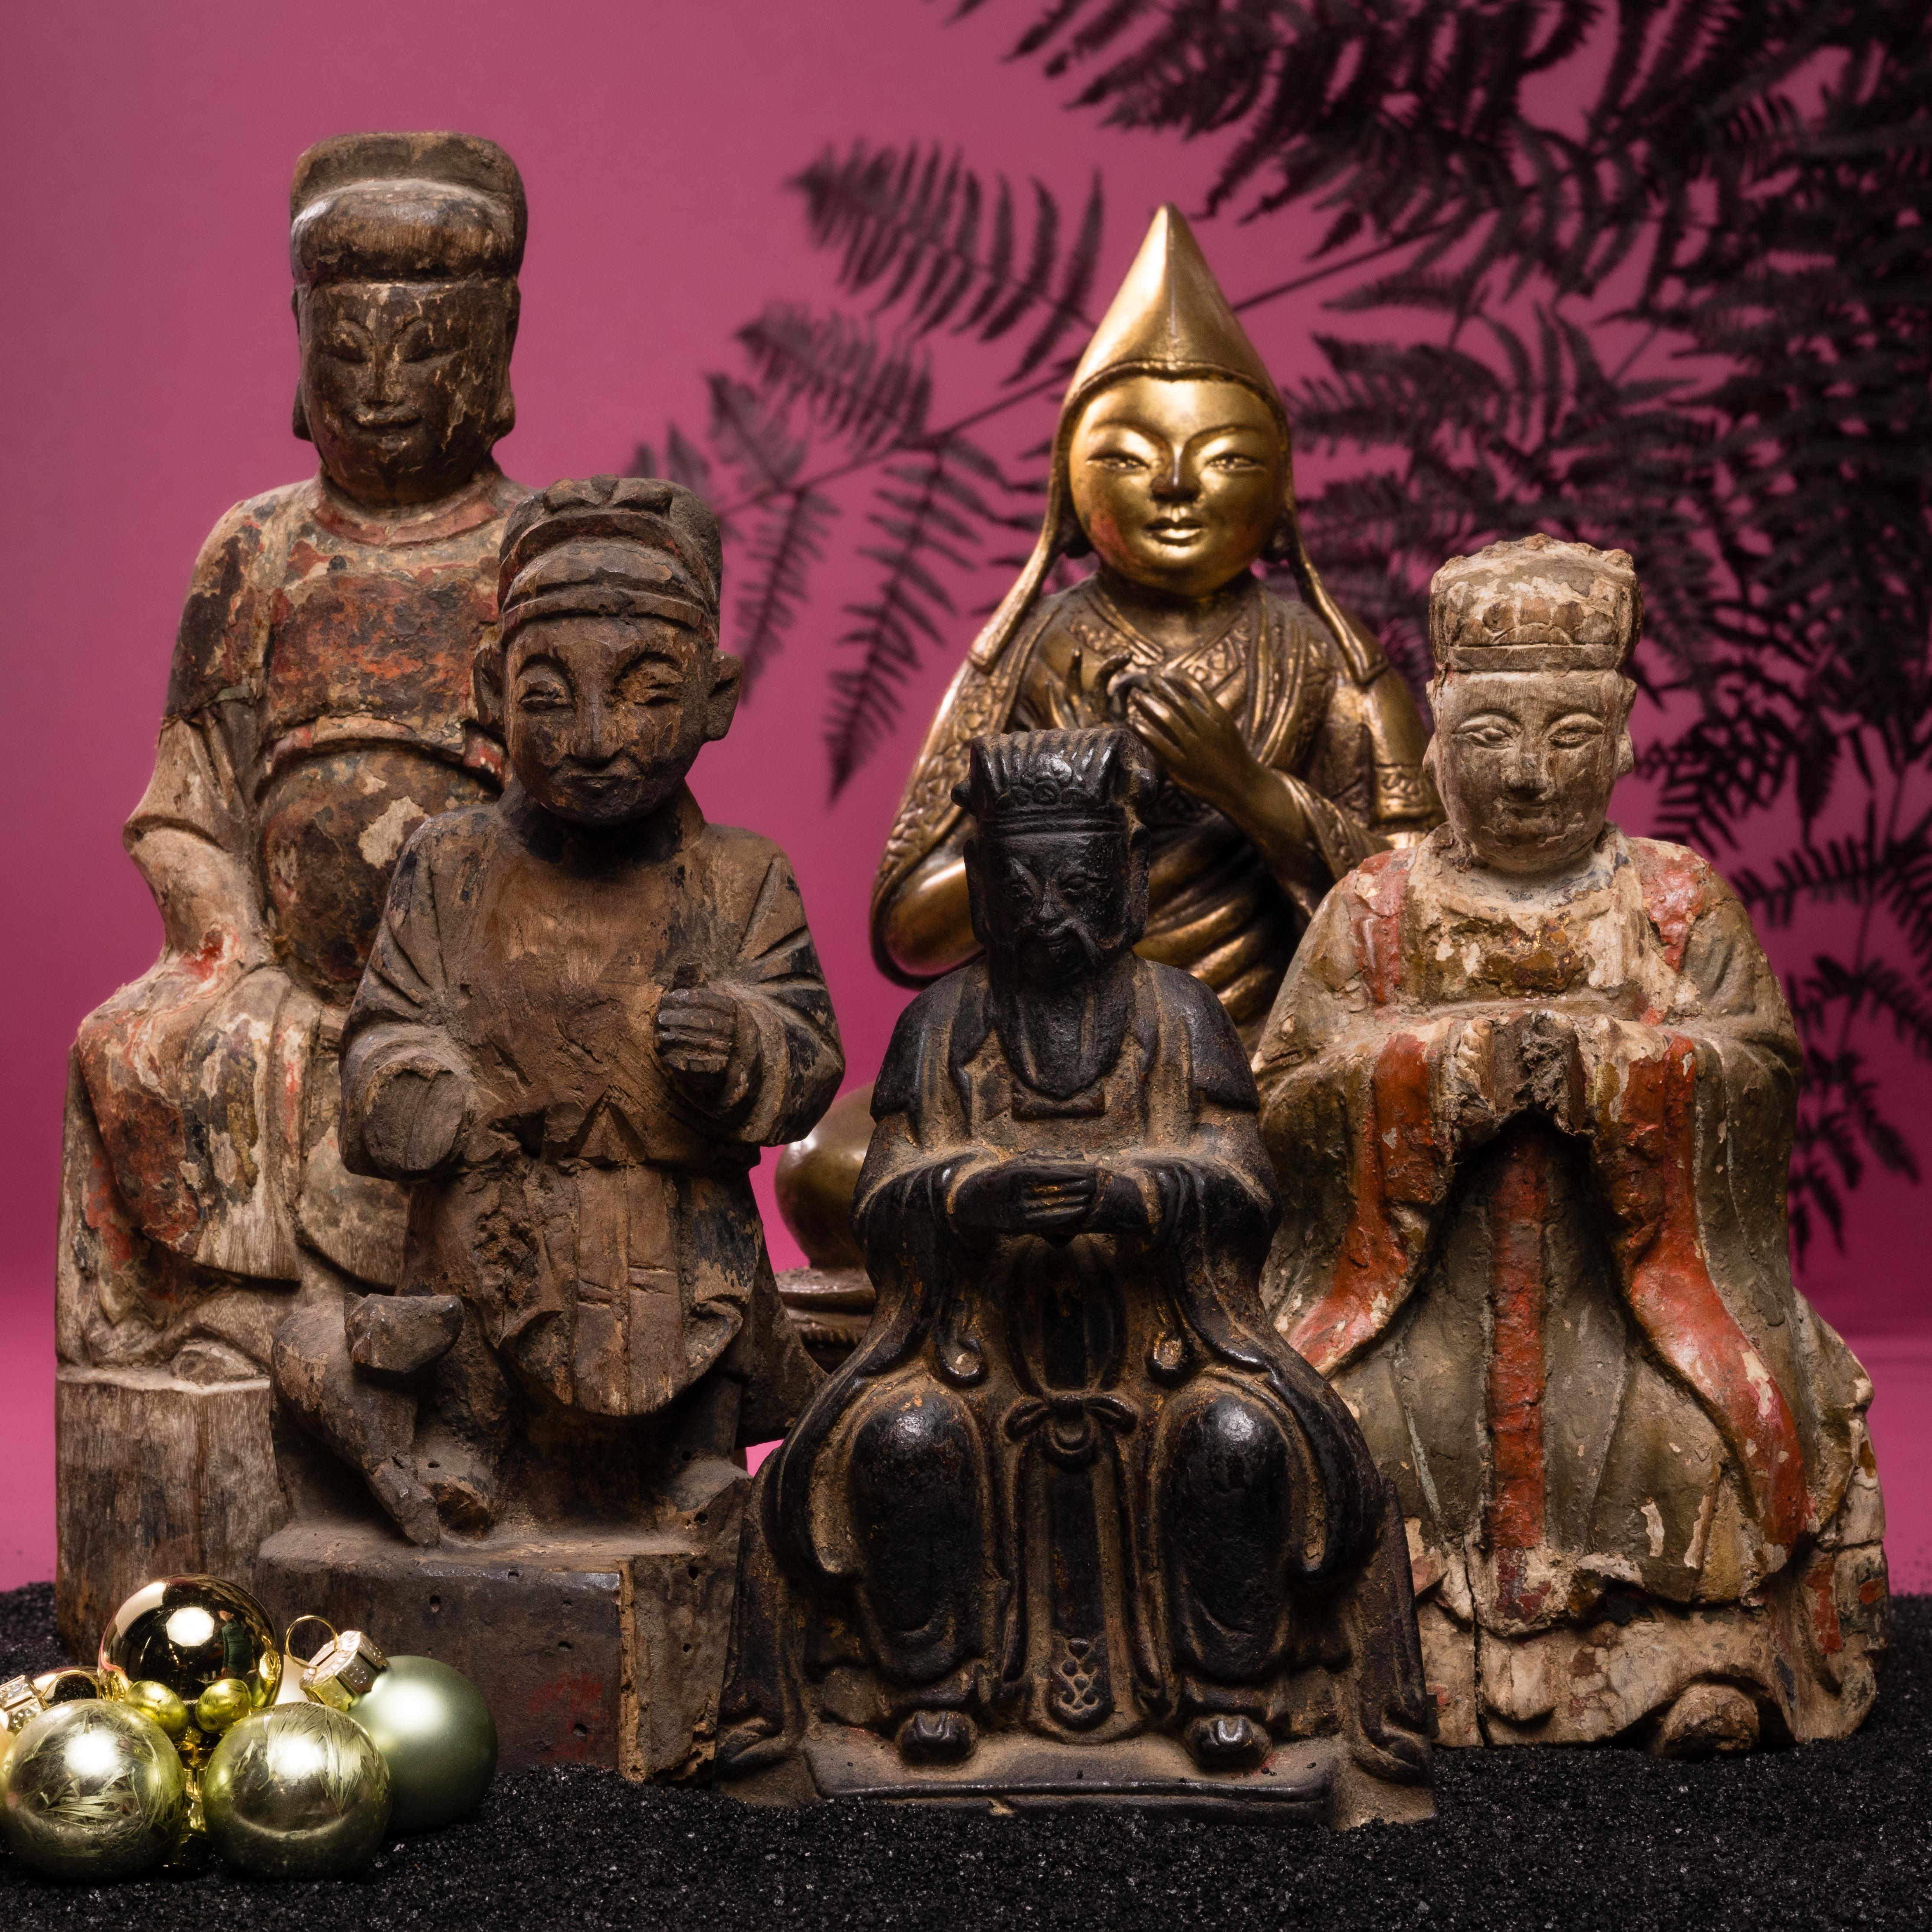 No idol in China is more widely worshiped than Caishen, the God of Wealth. His shrine can be found in nearly every home, his image set beside ancestors and other Daoist deities, and he is particularly worshiped during the Lunar New Year. This